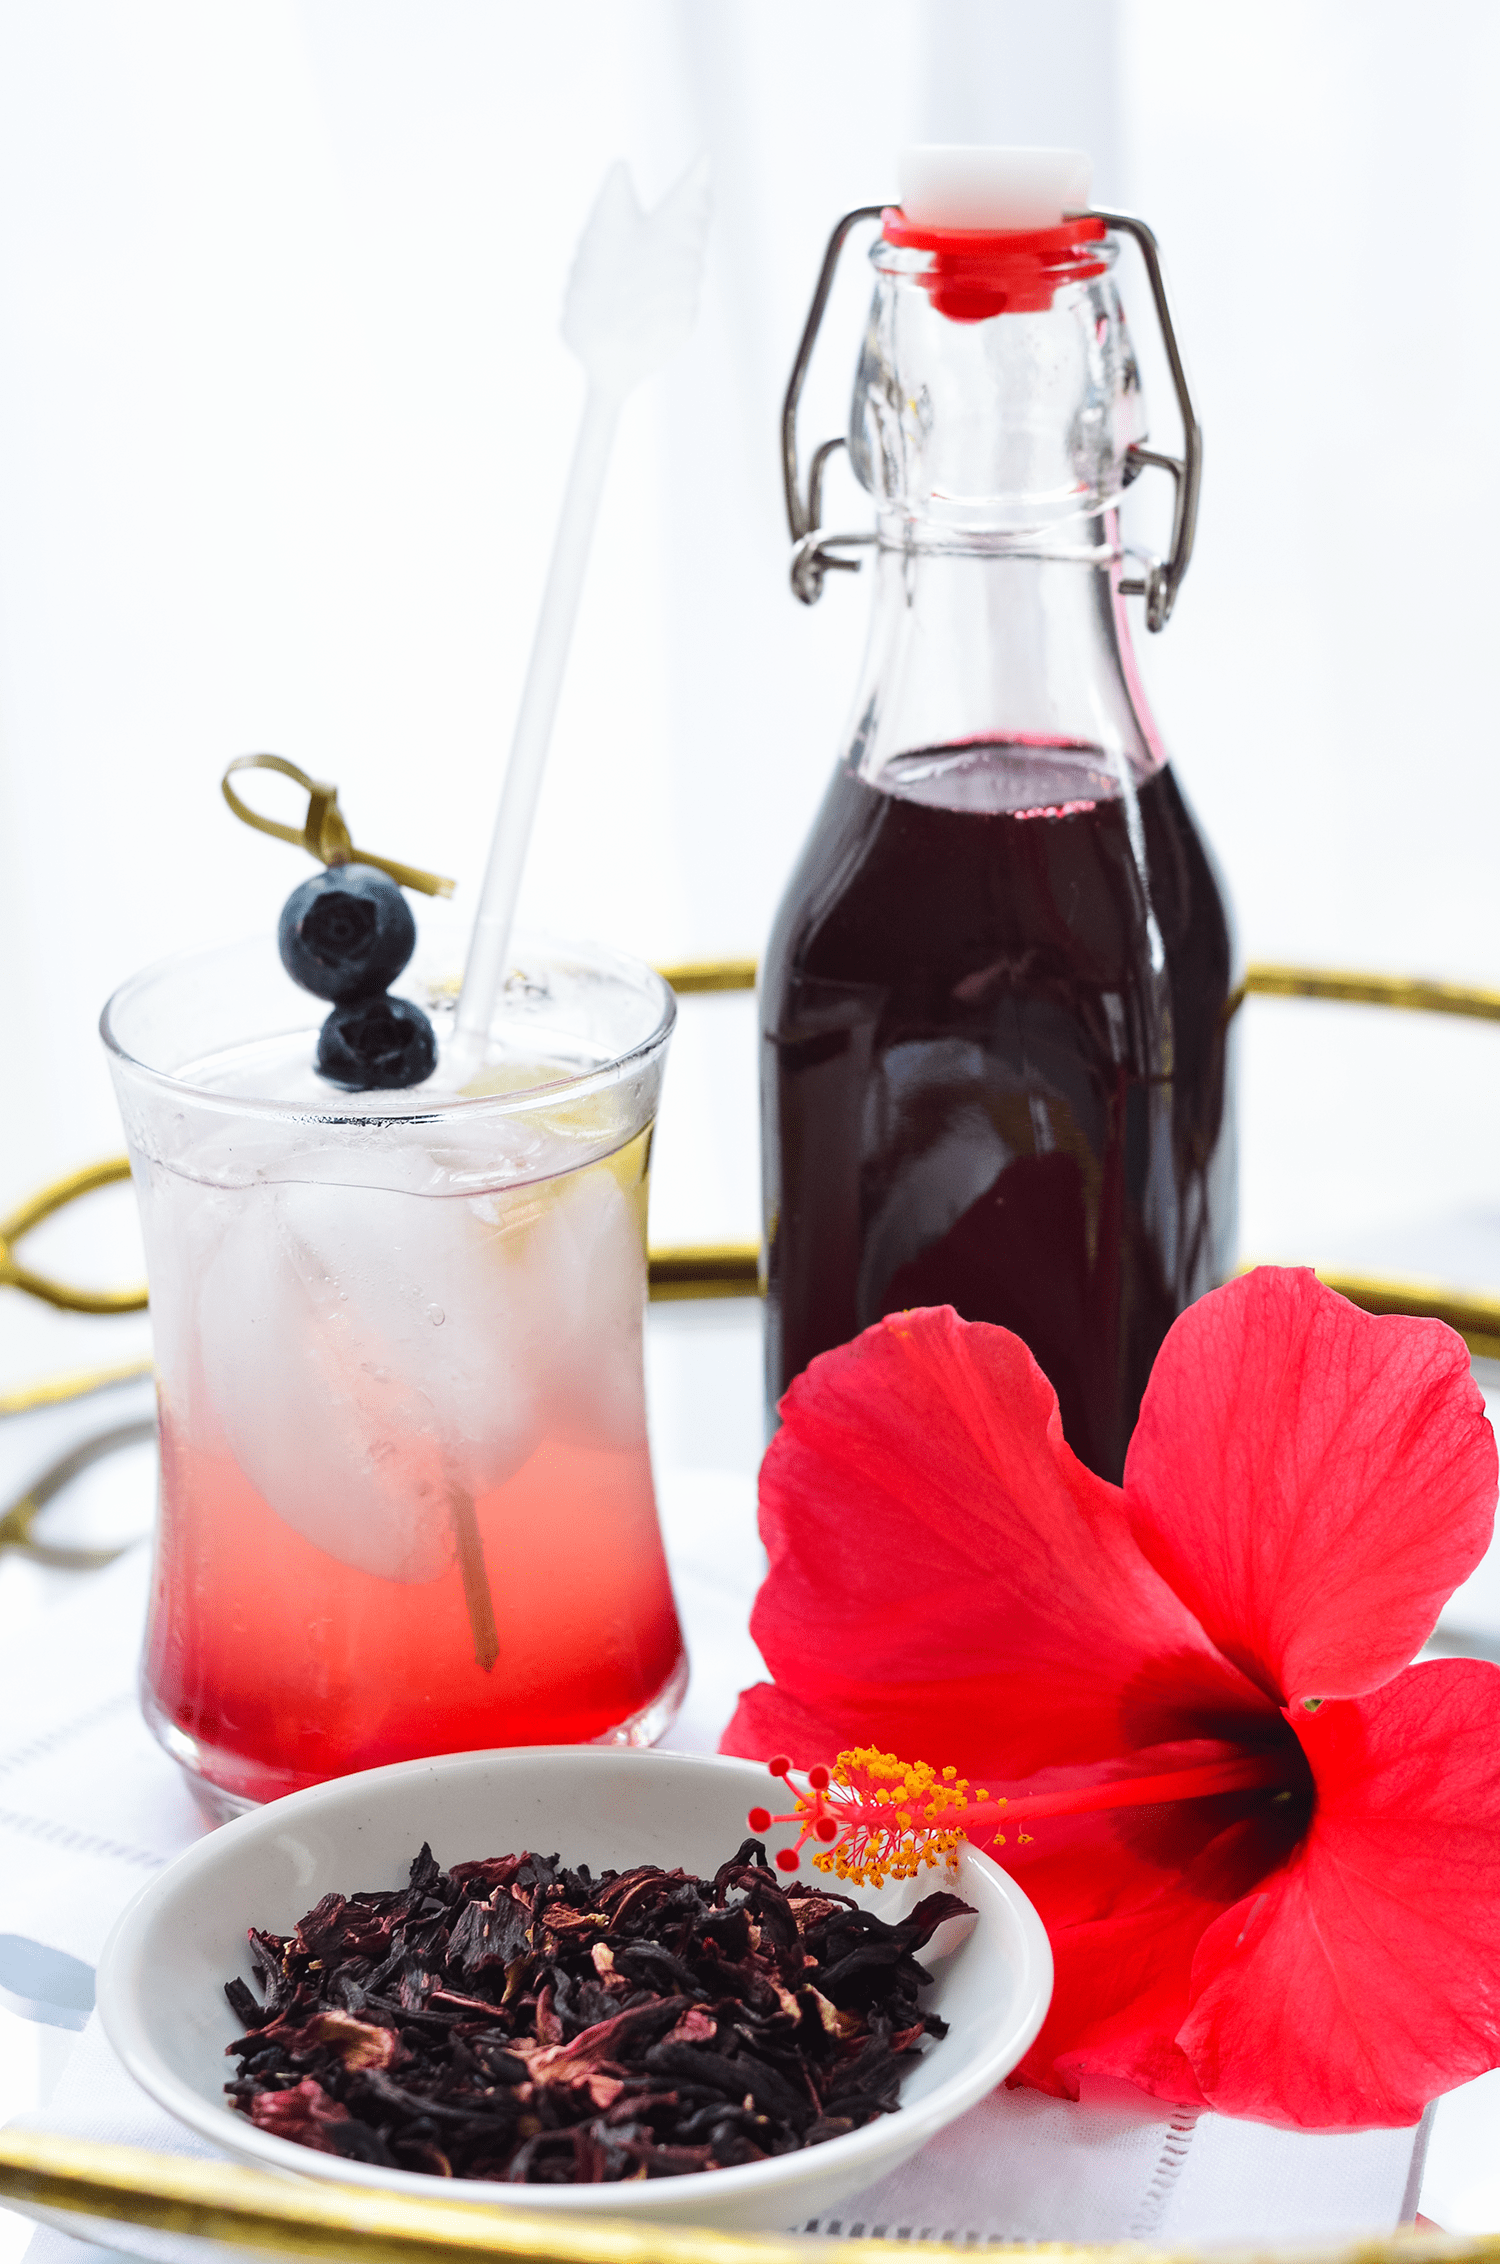 Make Your Own Lemon Hibiscus Simple Syrup